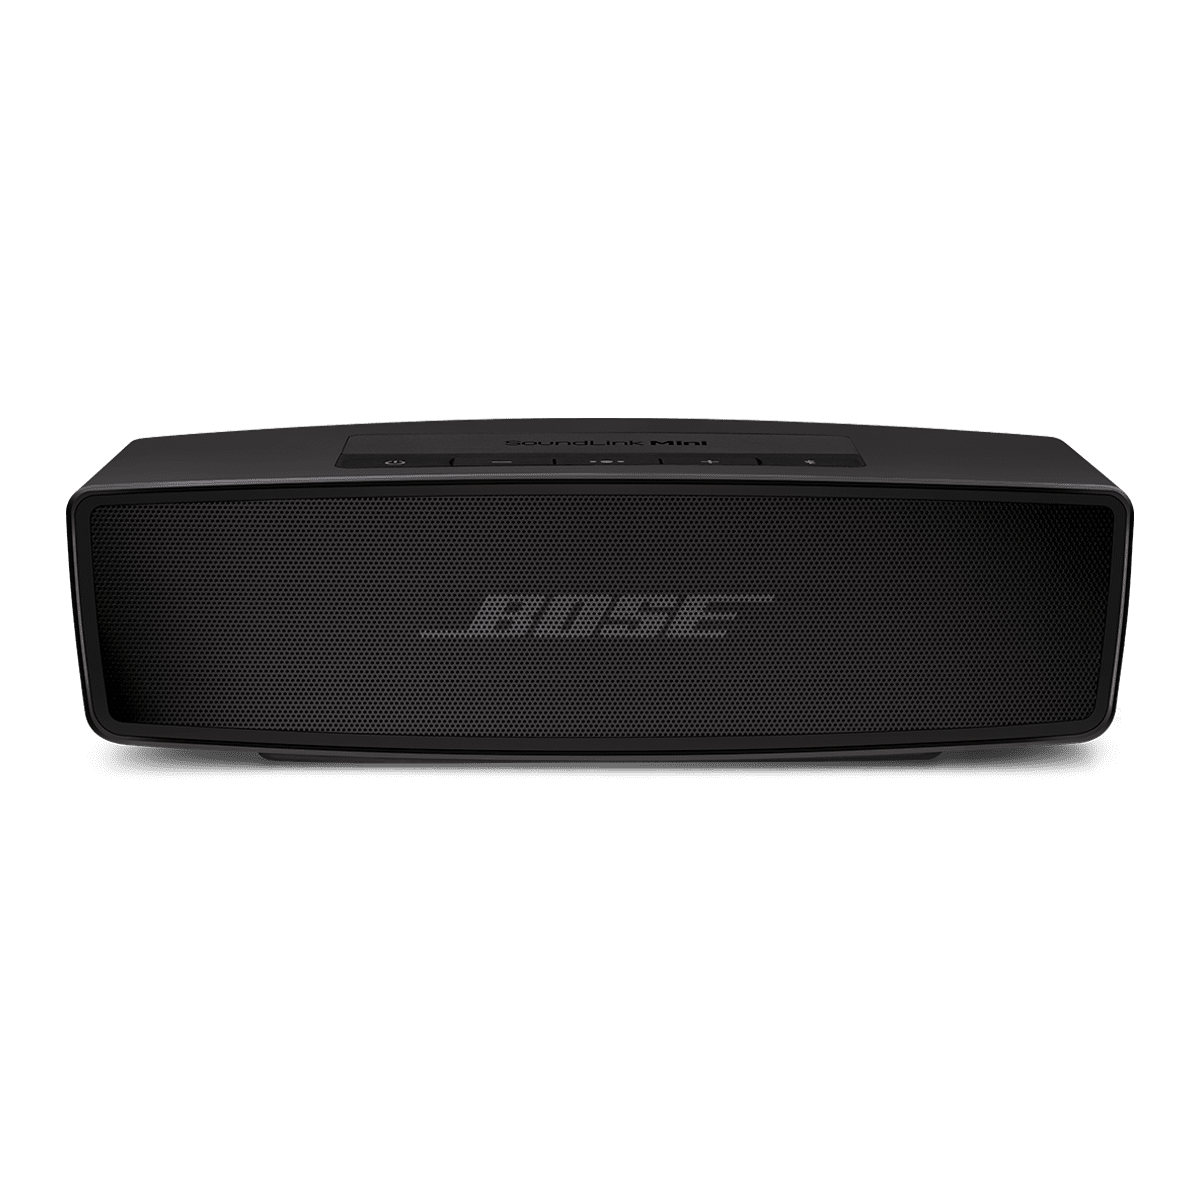 Ourfriday | Bose SoundLink Mini II Special Edition Bluetooth Speaker - Black